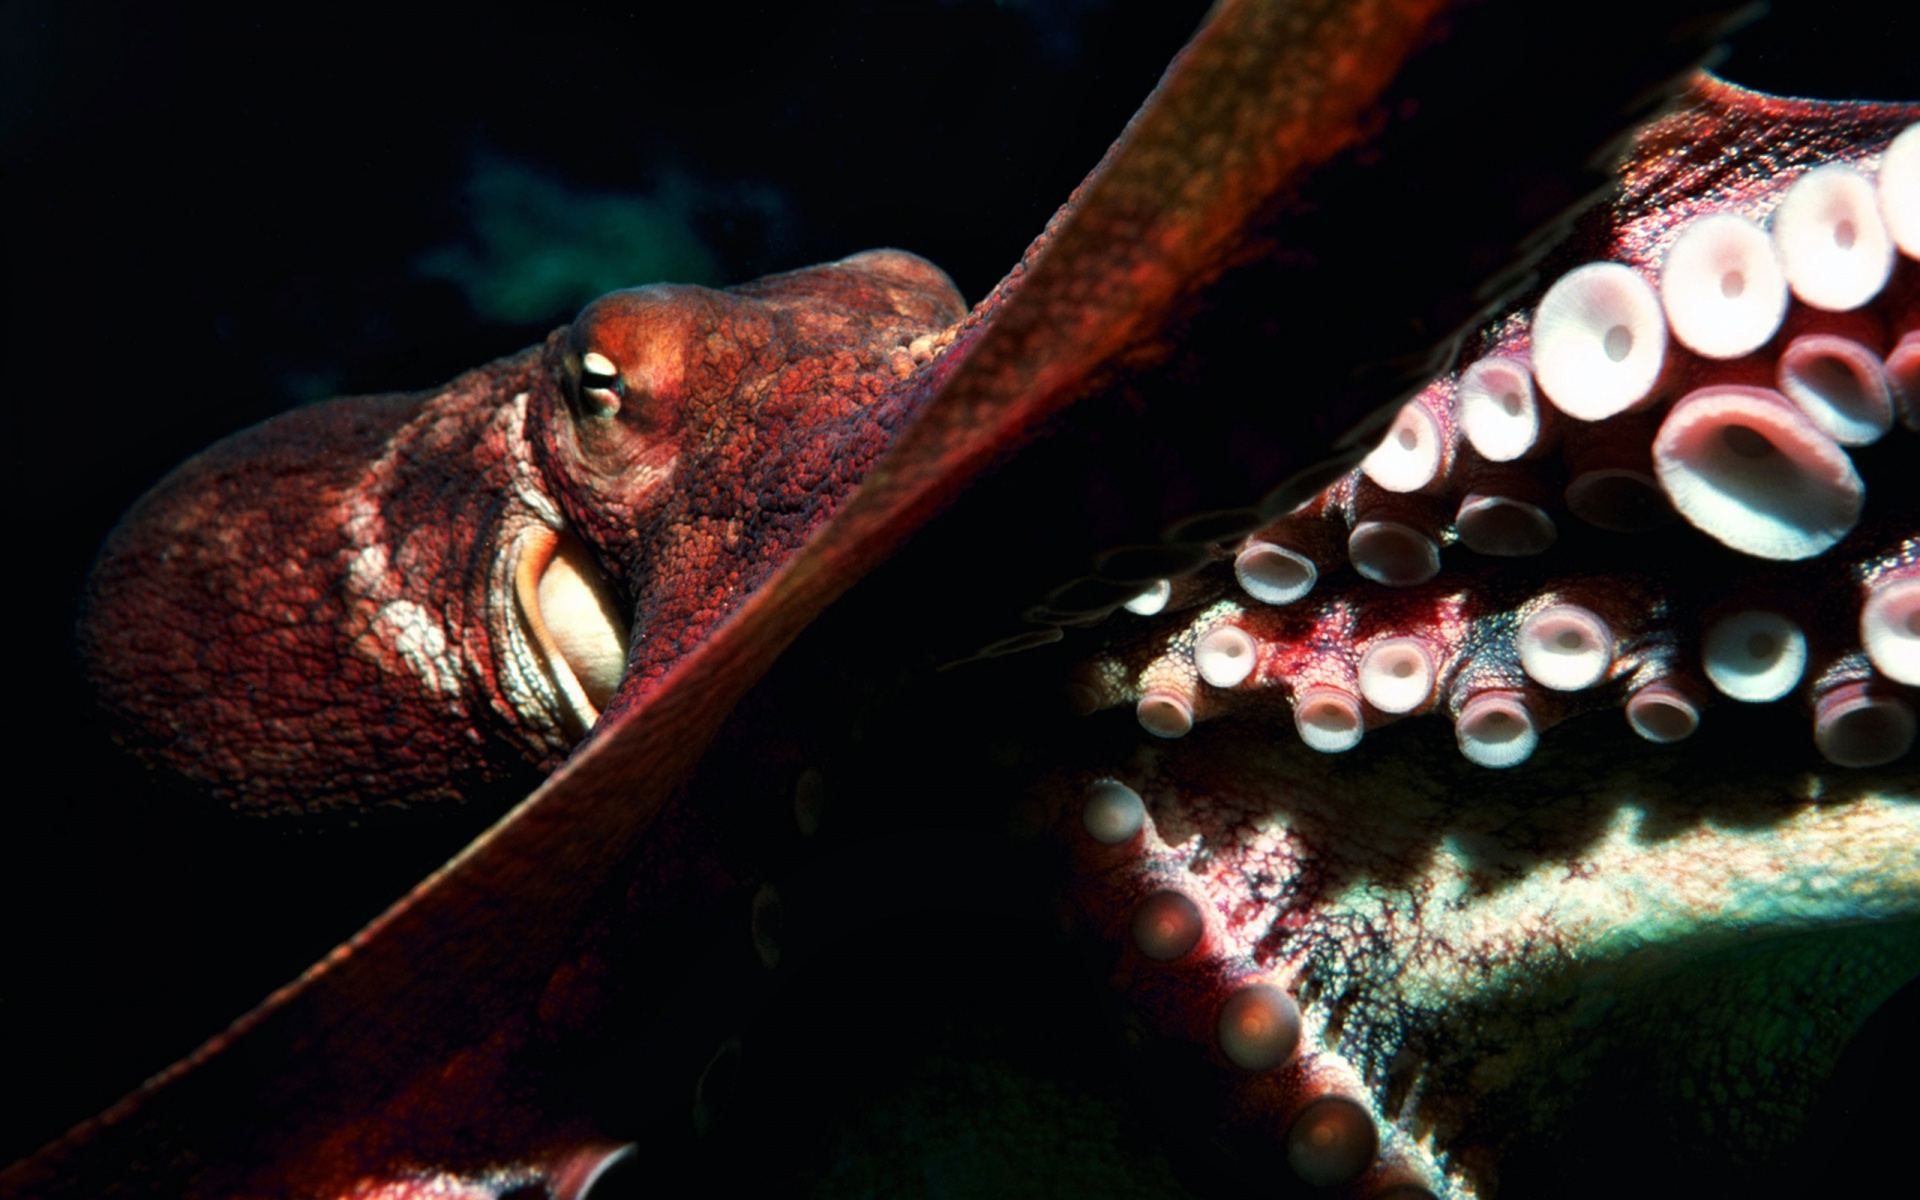 HD wallpaper, Giant, Octopus, Pictures